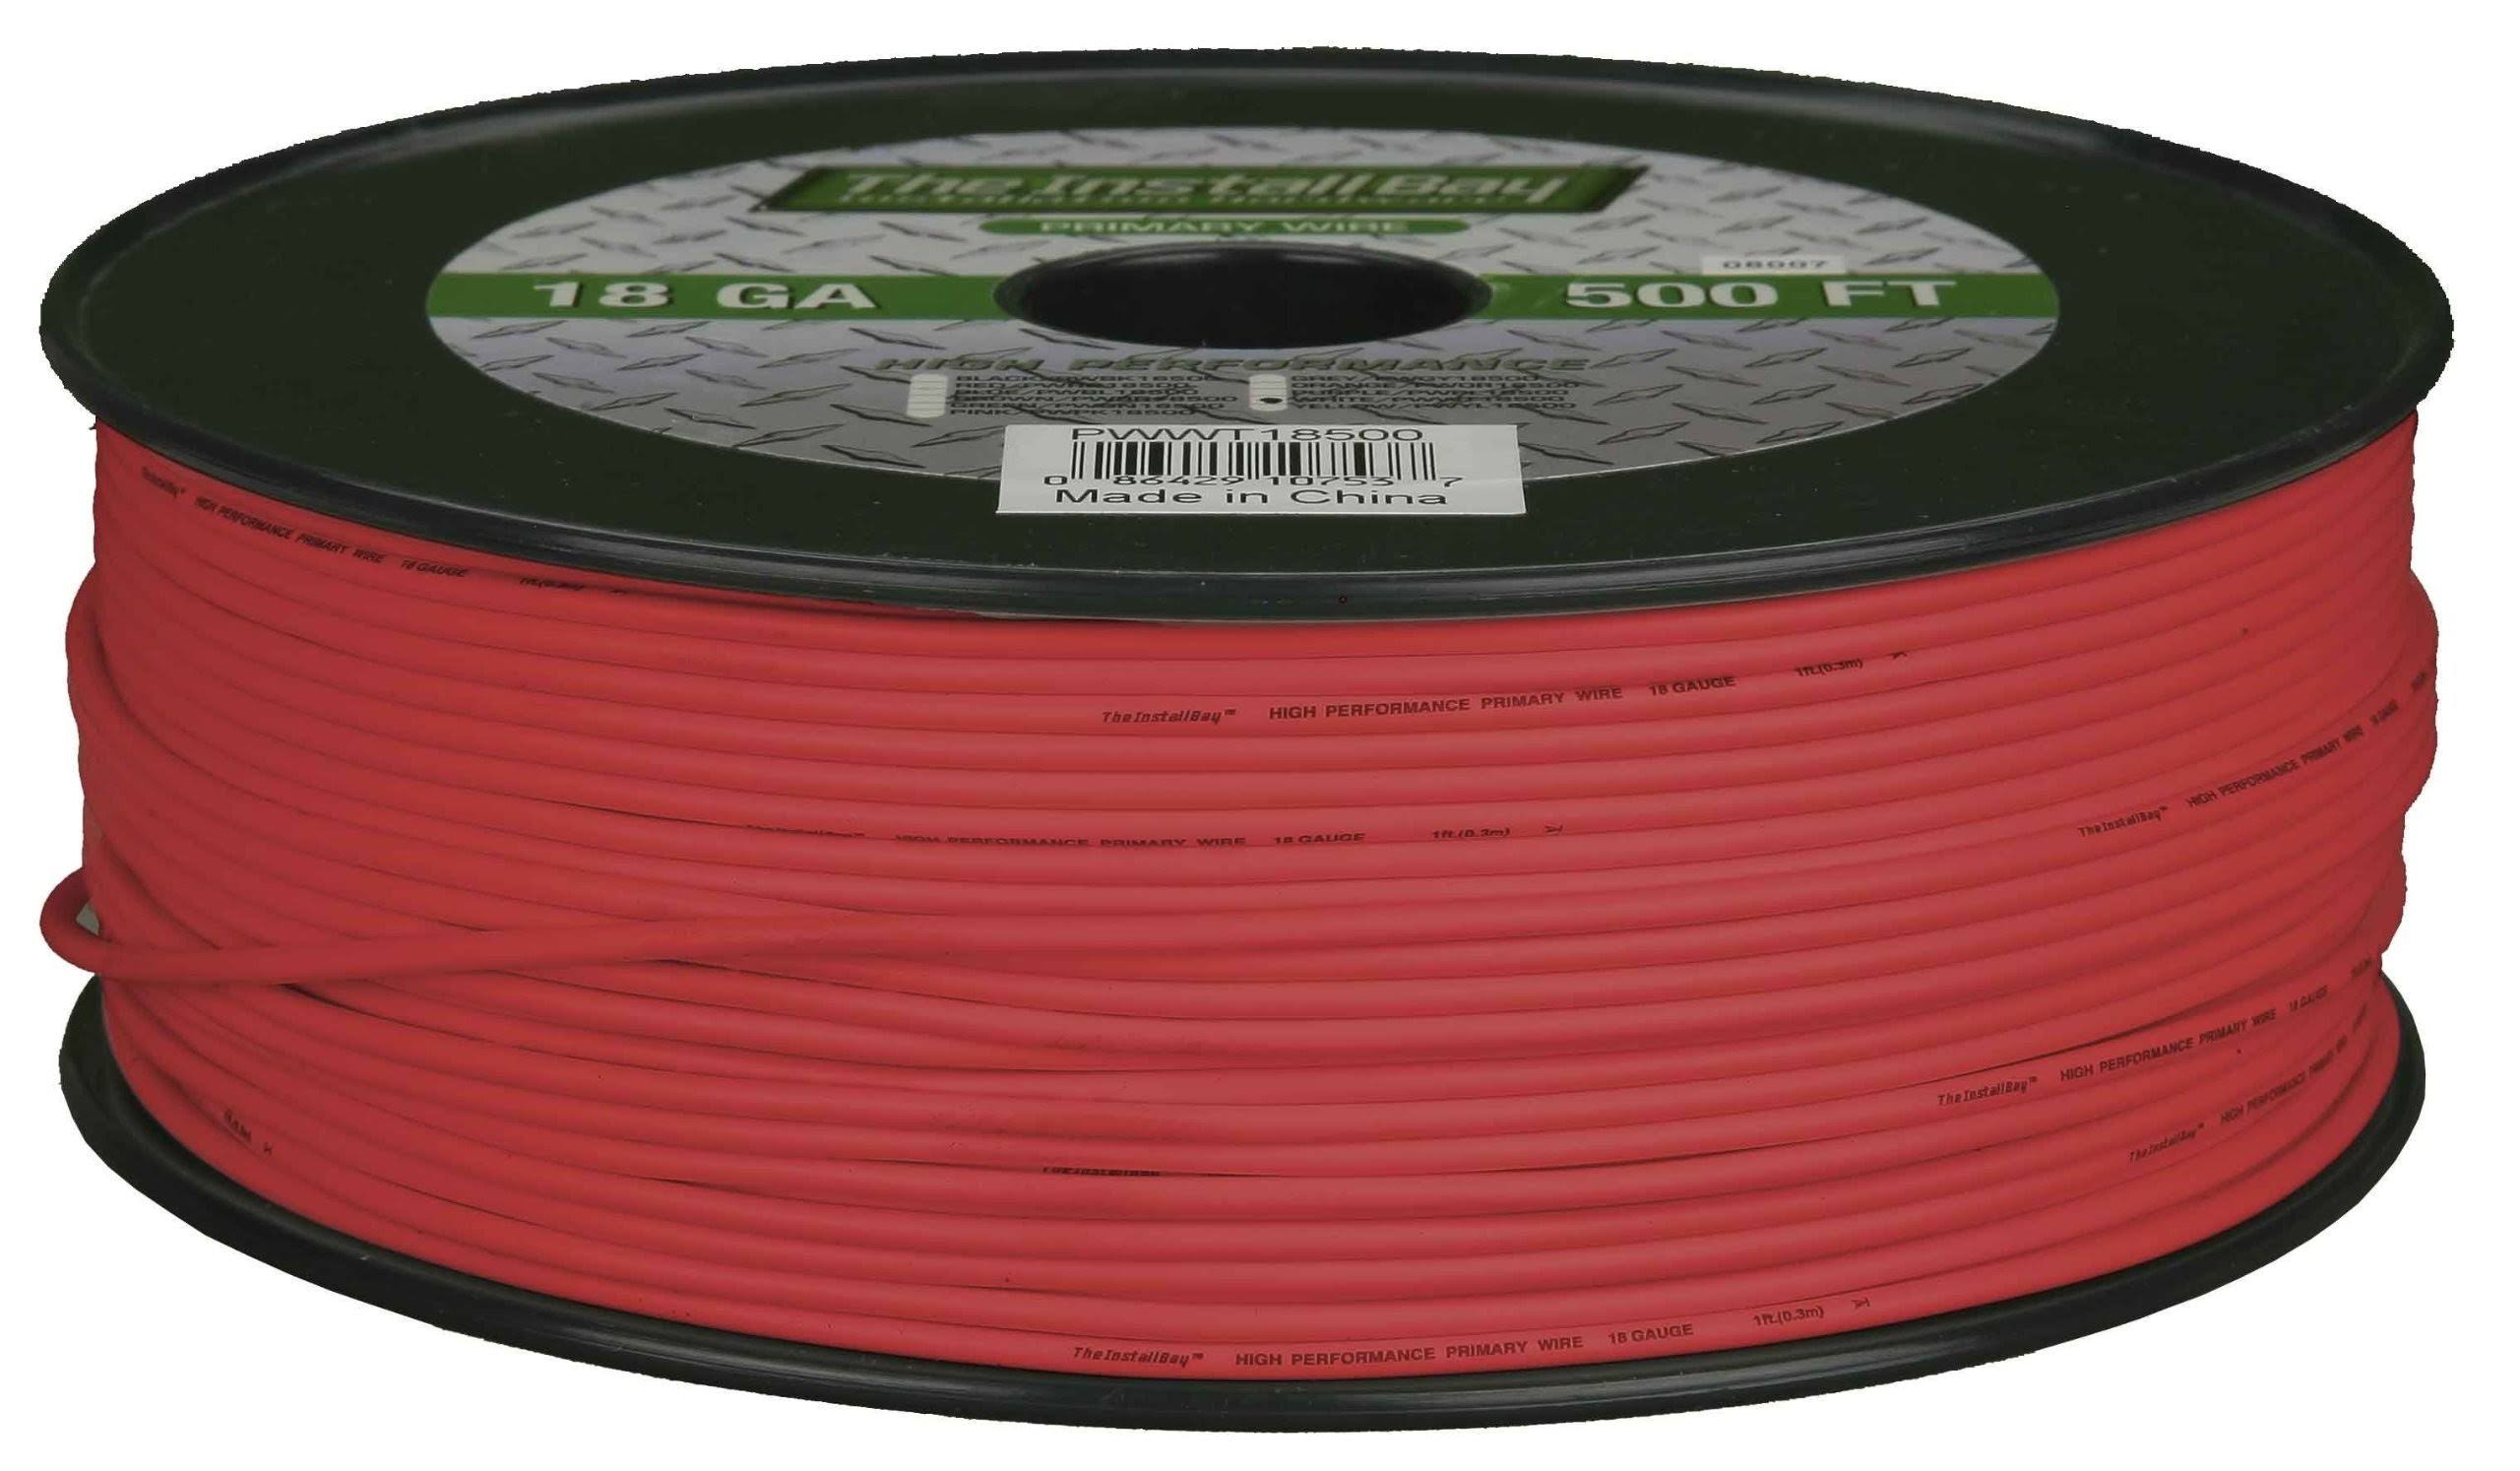 Install Bay PWRD14500 500' 14 Gauge Red Primary Wire